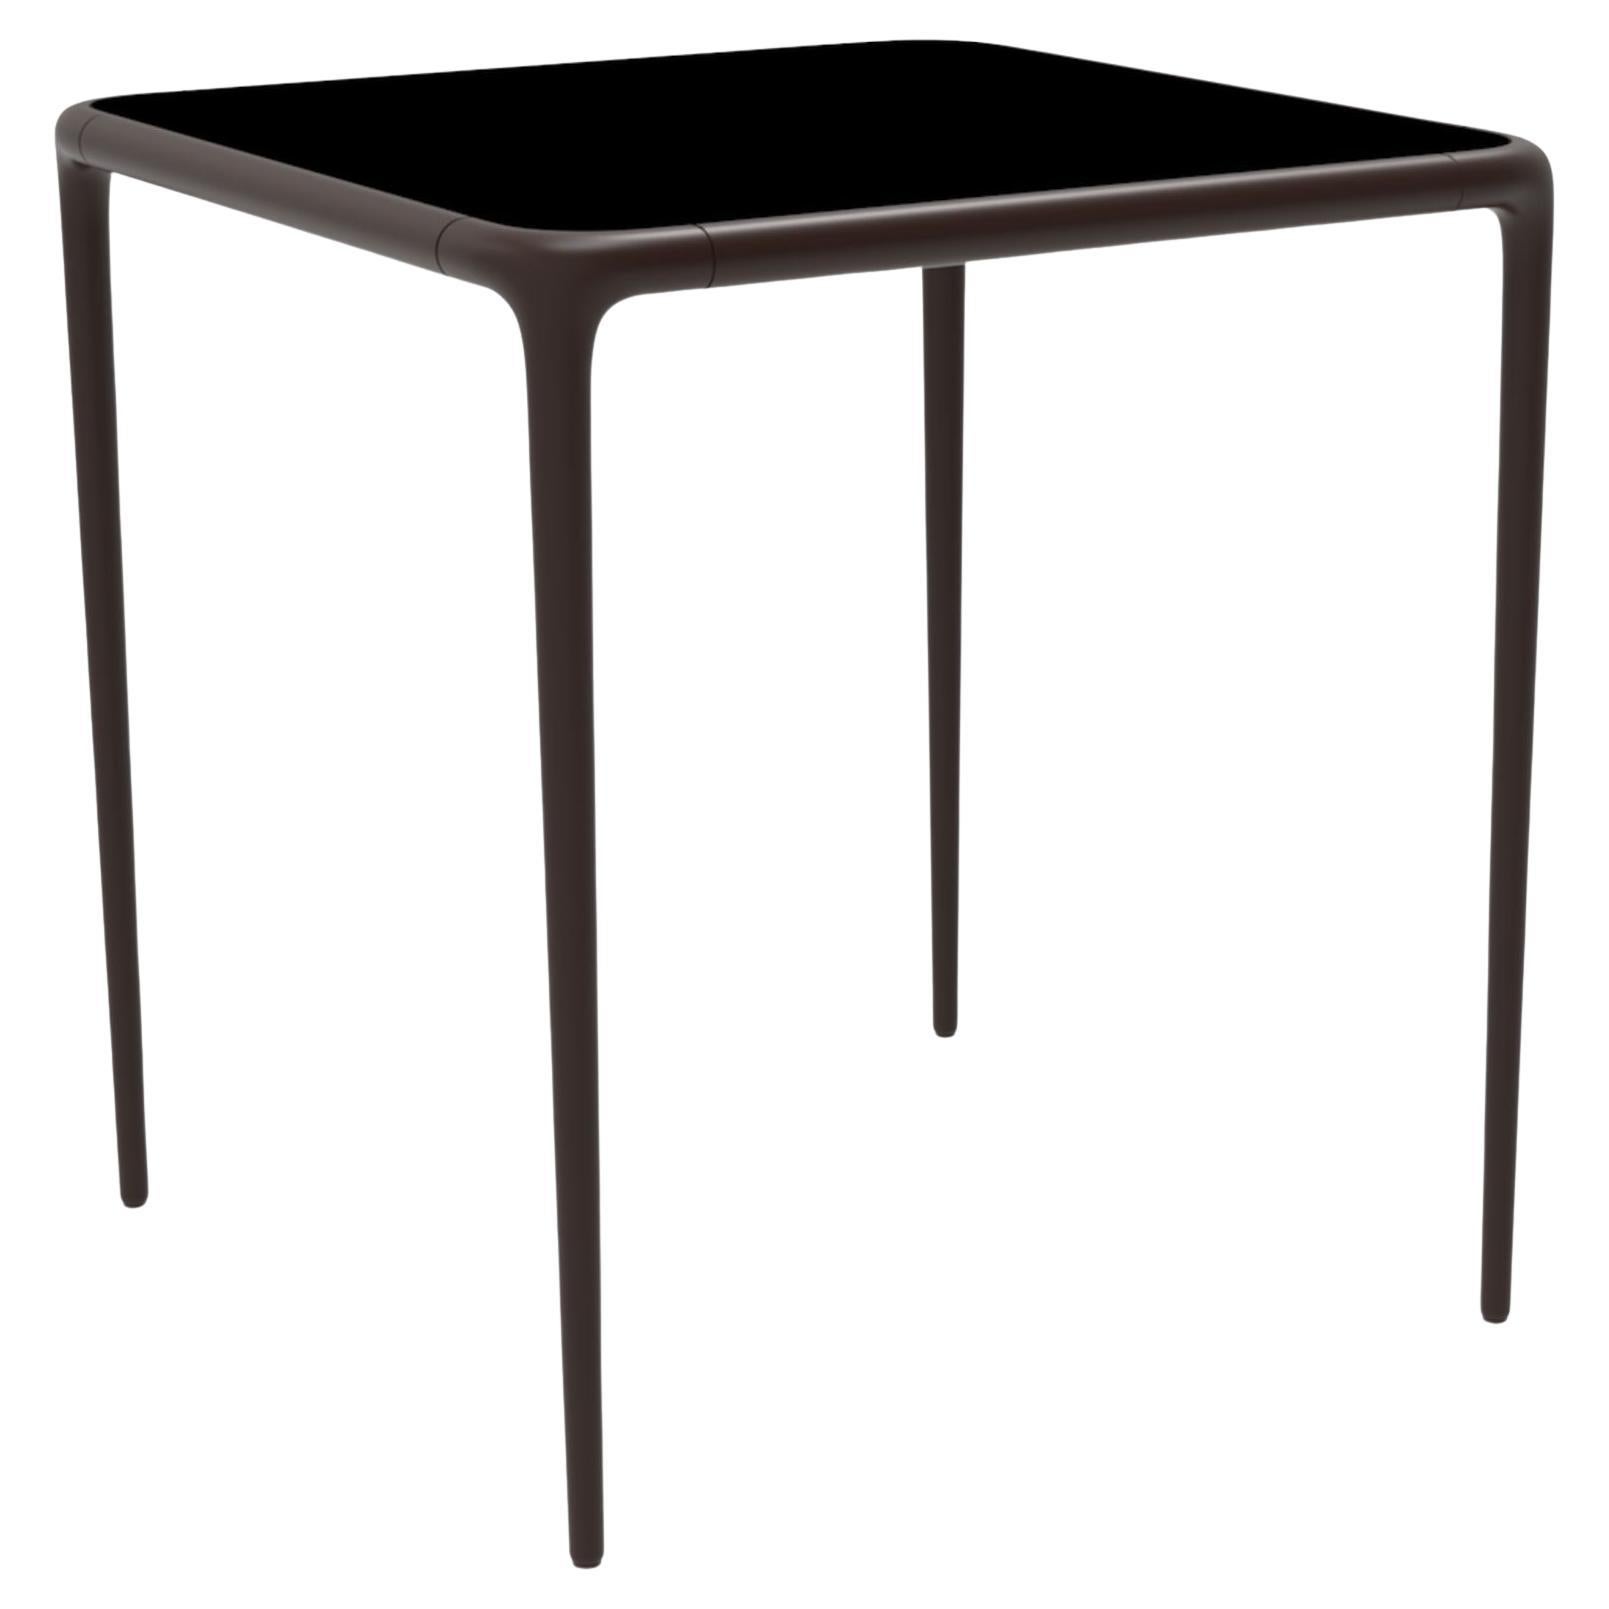 Xaloc Chocolate Top Glass Table 70 by Mowee For Sale